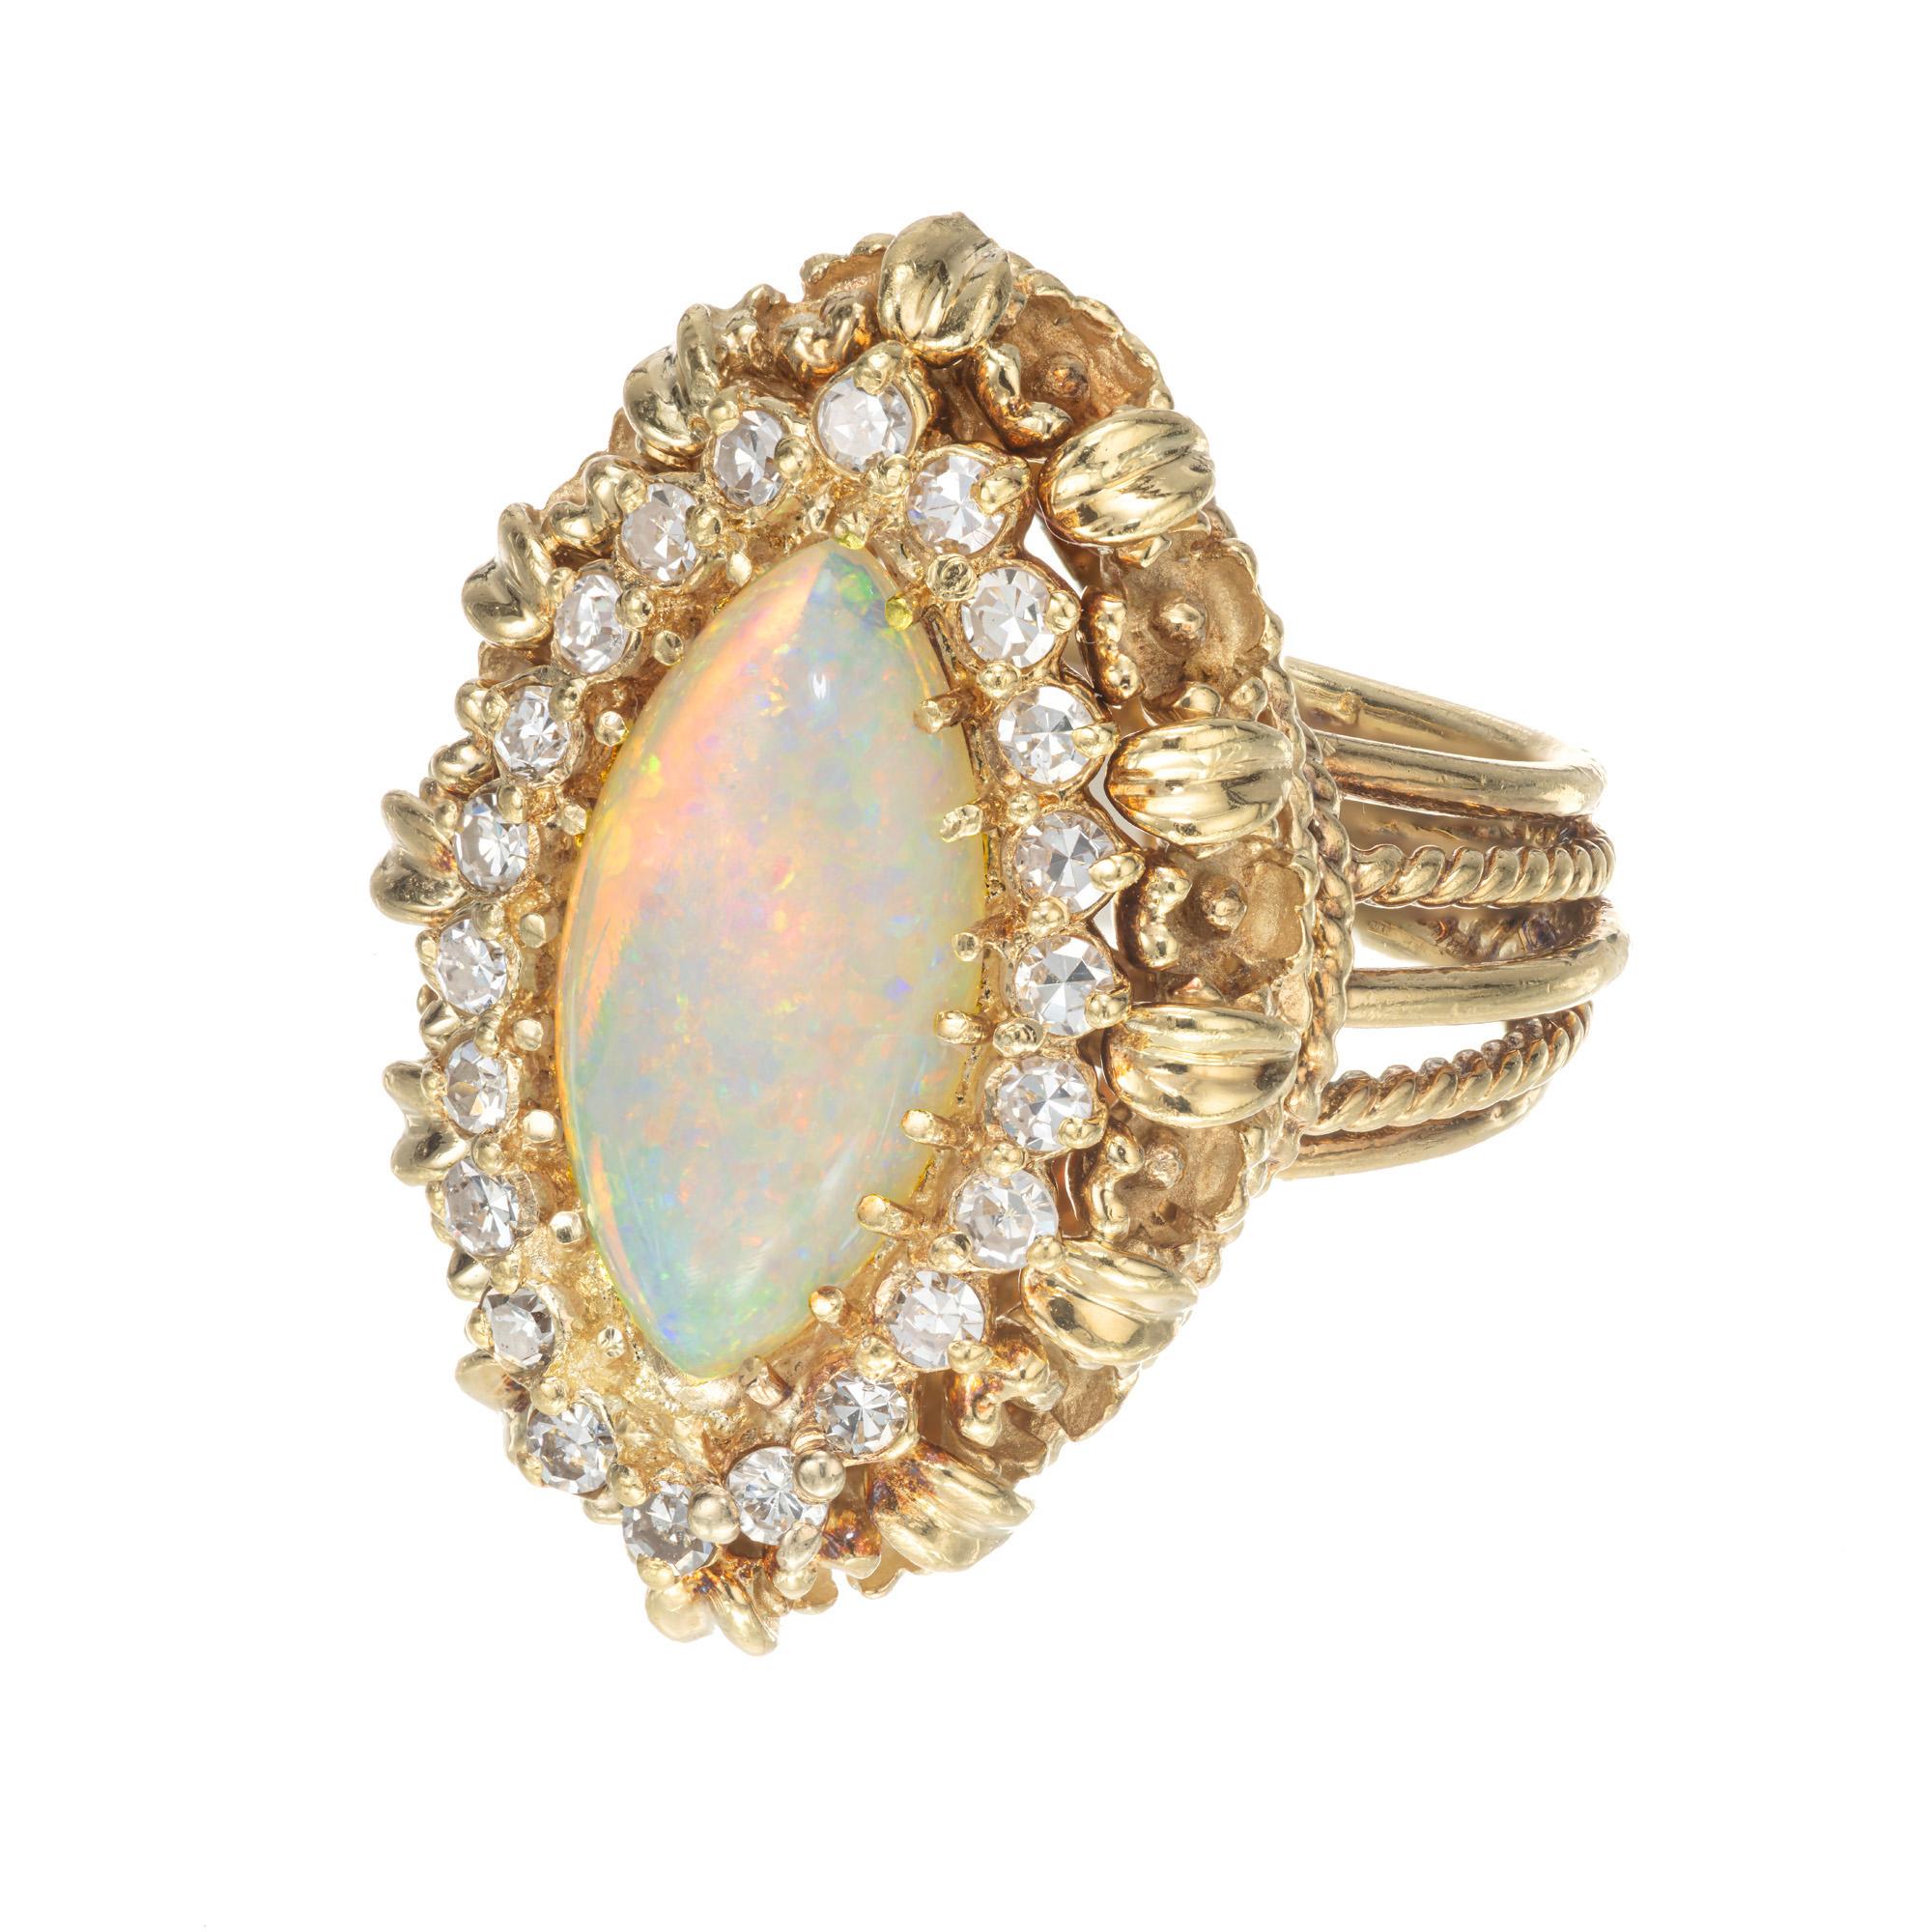 1950's opal and diamond ring. 3.50ct Marquise cut center opal, 18k yellow gold handmade wire cocktail setting with a halo of 22 round single cut diamonds. The opal is bluish green with red and orange flashes. 

1 Marquise cut opal 3.50cts 
22 round